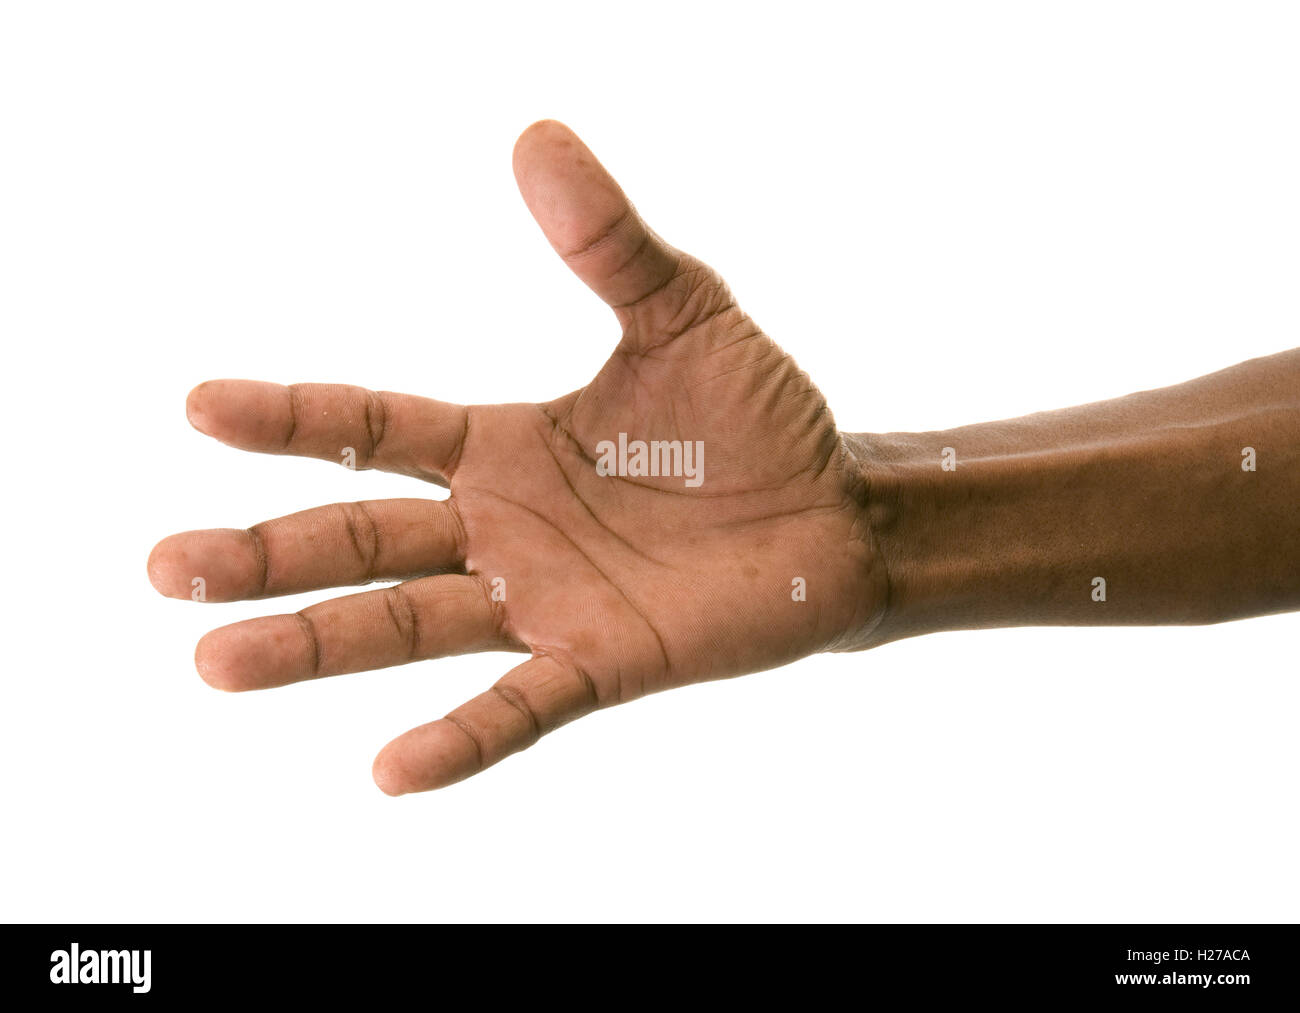 African's open hand begging or appealing Stock Photo